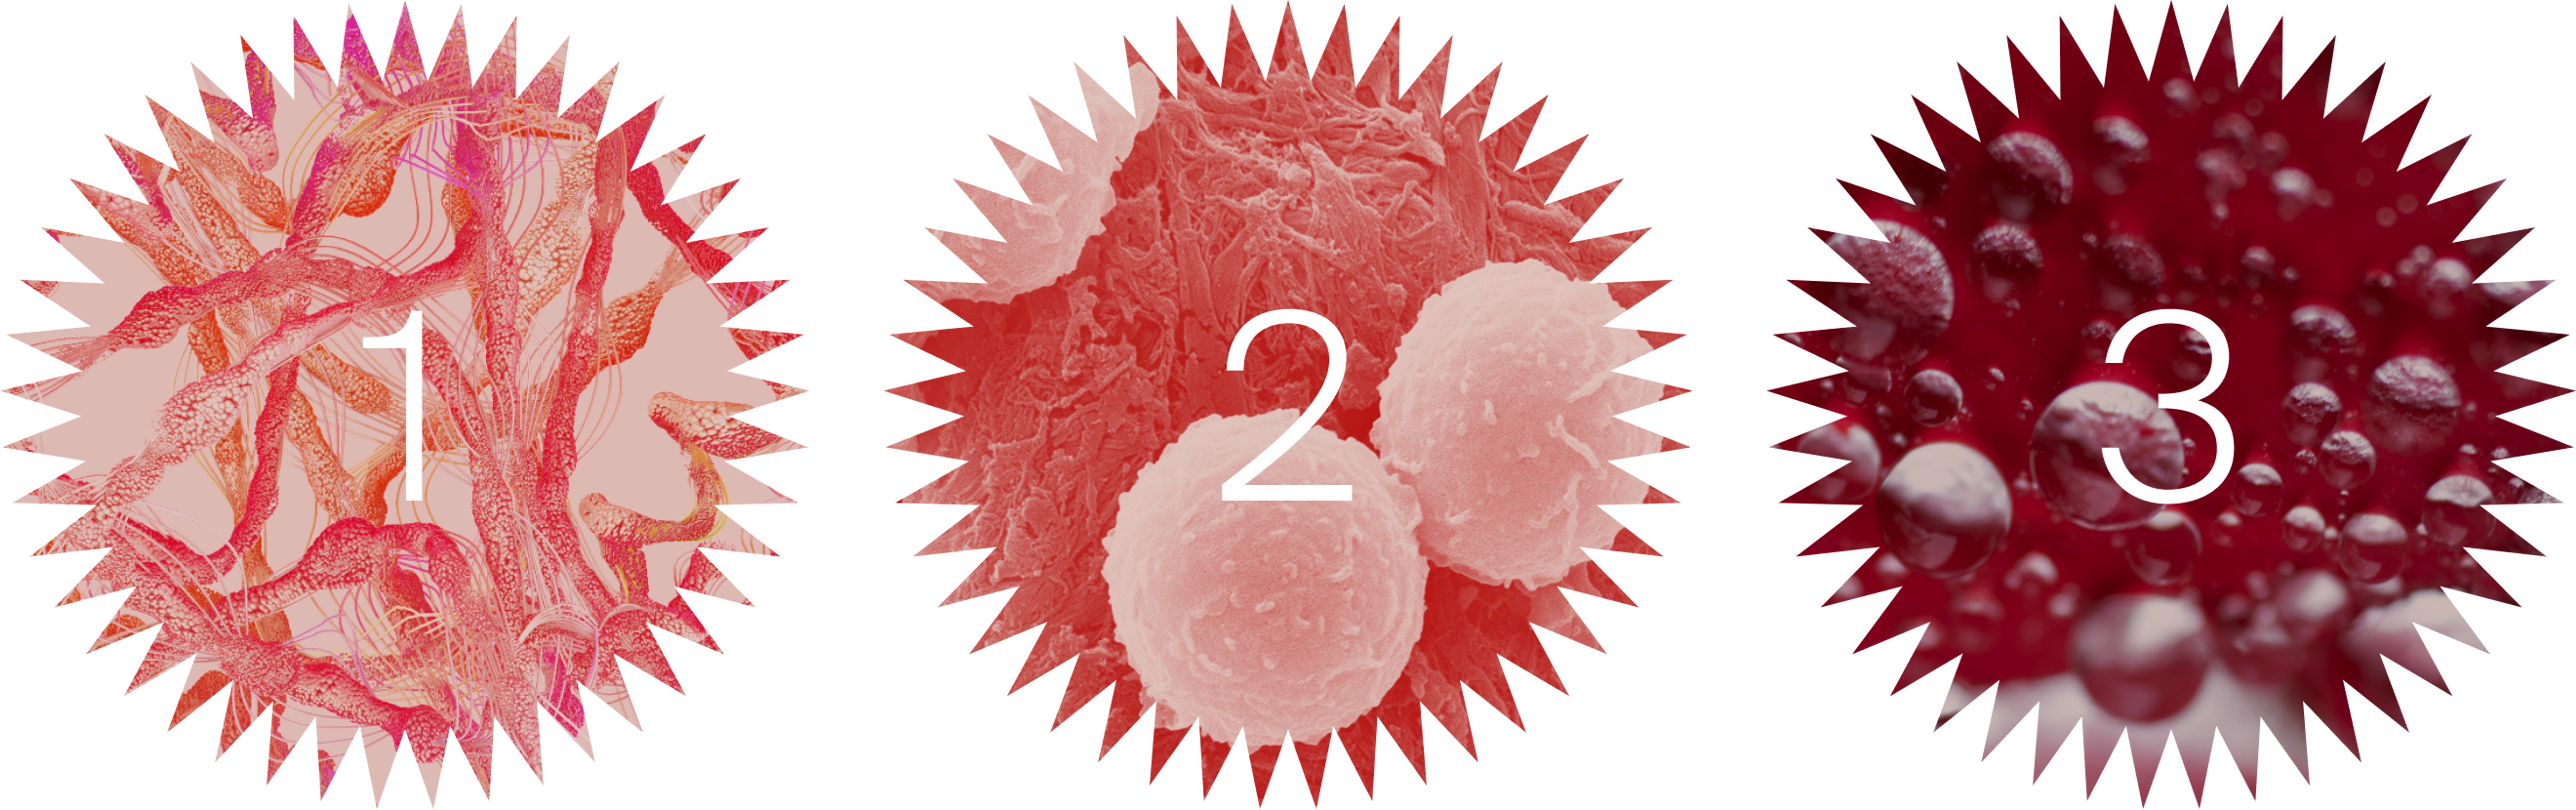 1. C-reactive protein 2. Increased white blood cell count 3. Erythrocyte sedimentation rate